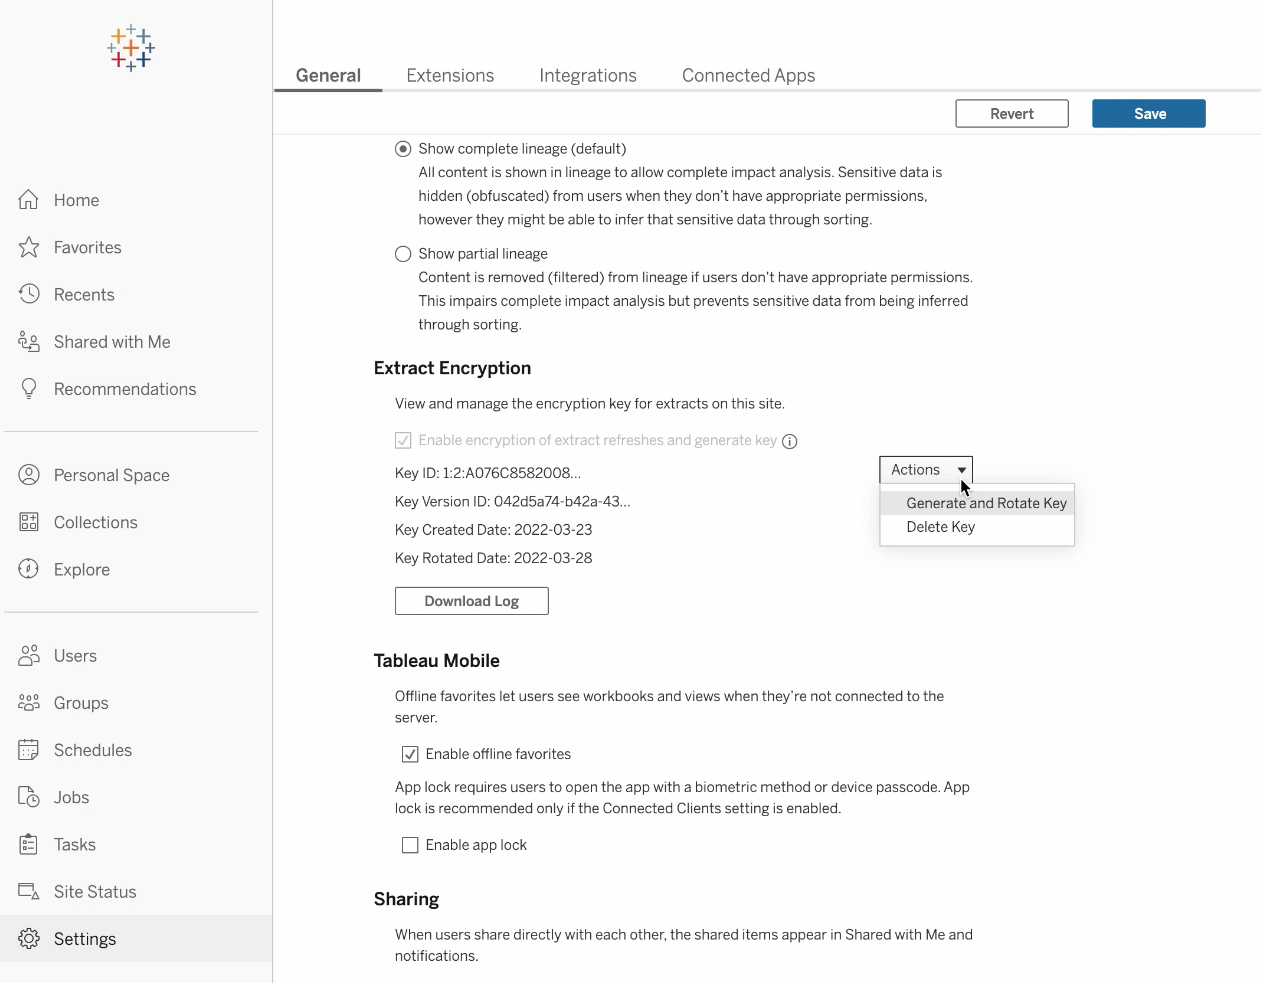 Tableau Cloud settings interface, where a site administrator is selecting an action in the Extract Encryption section to generate and rotate customer-managed encryption keys.